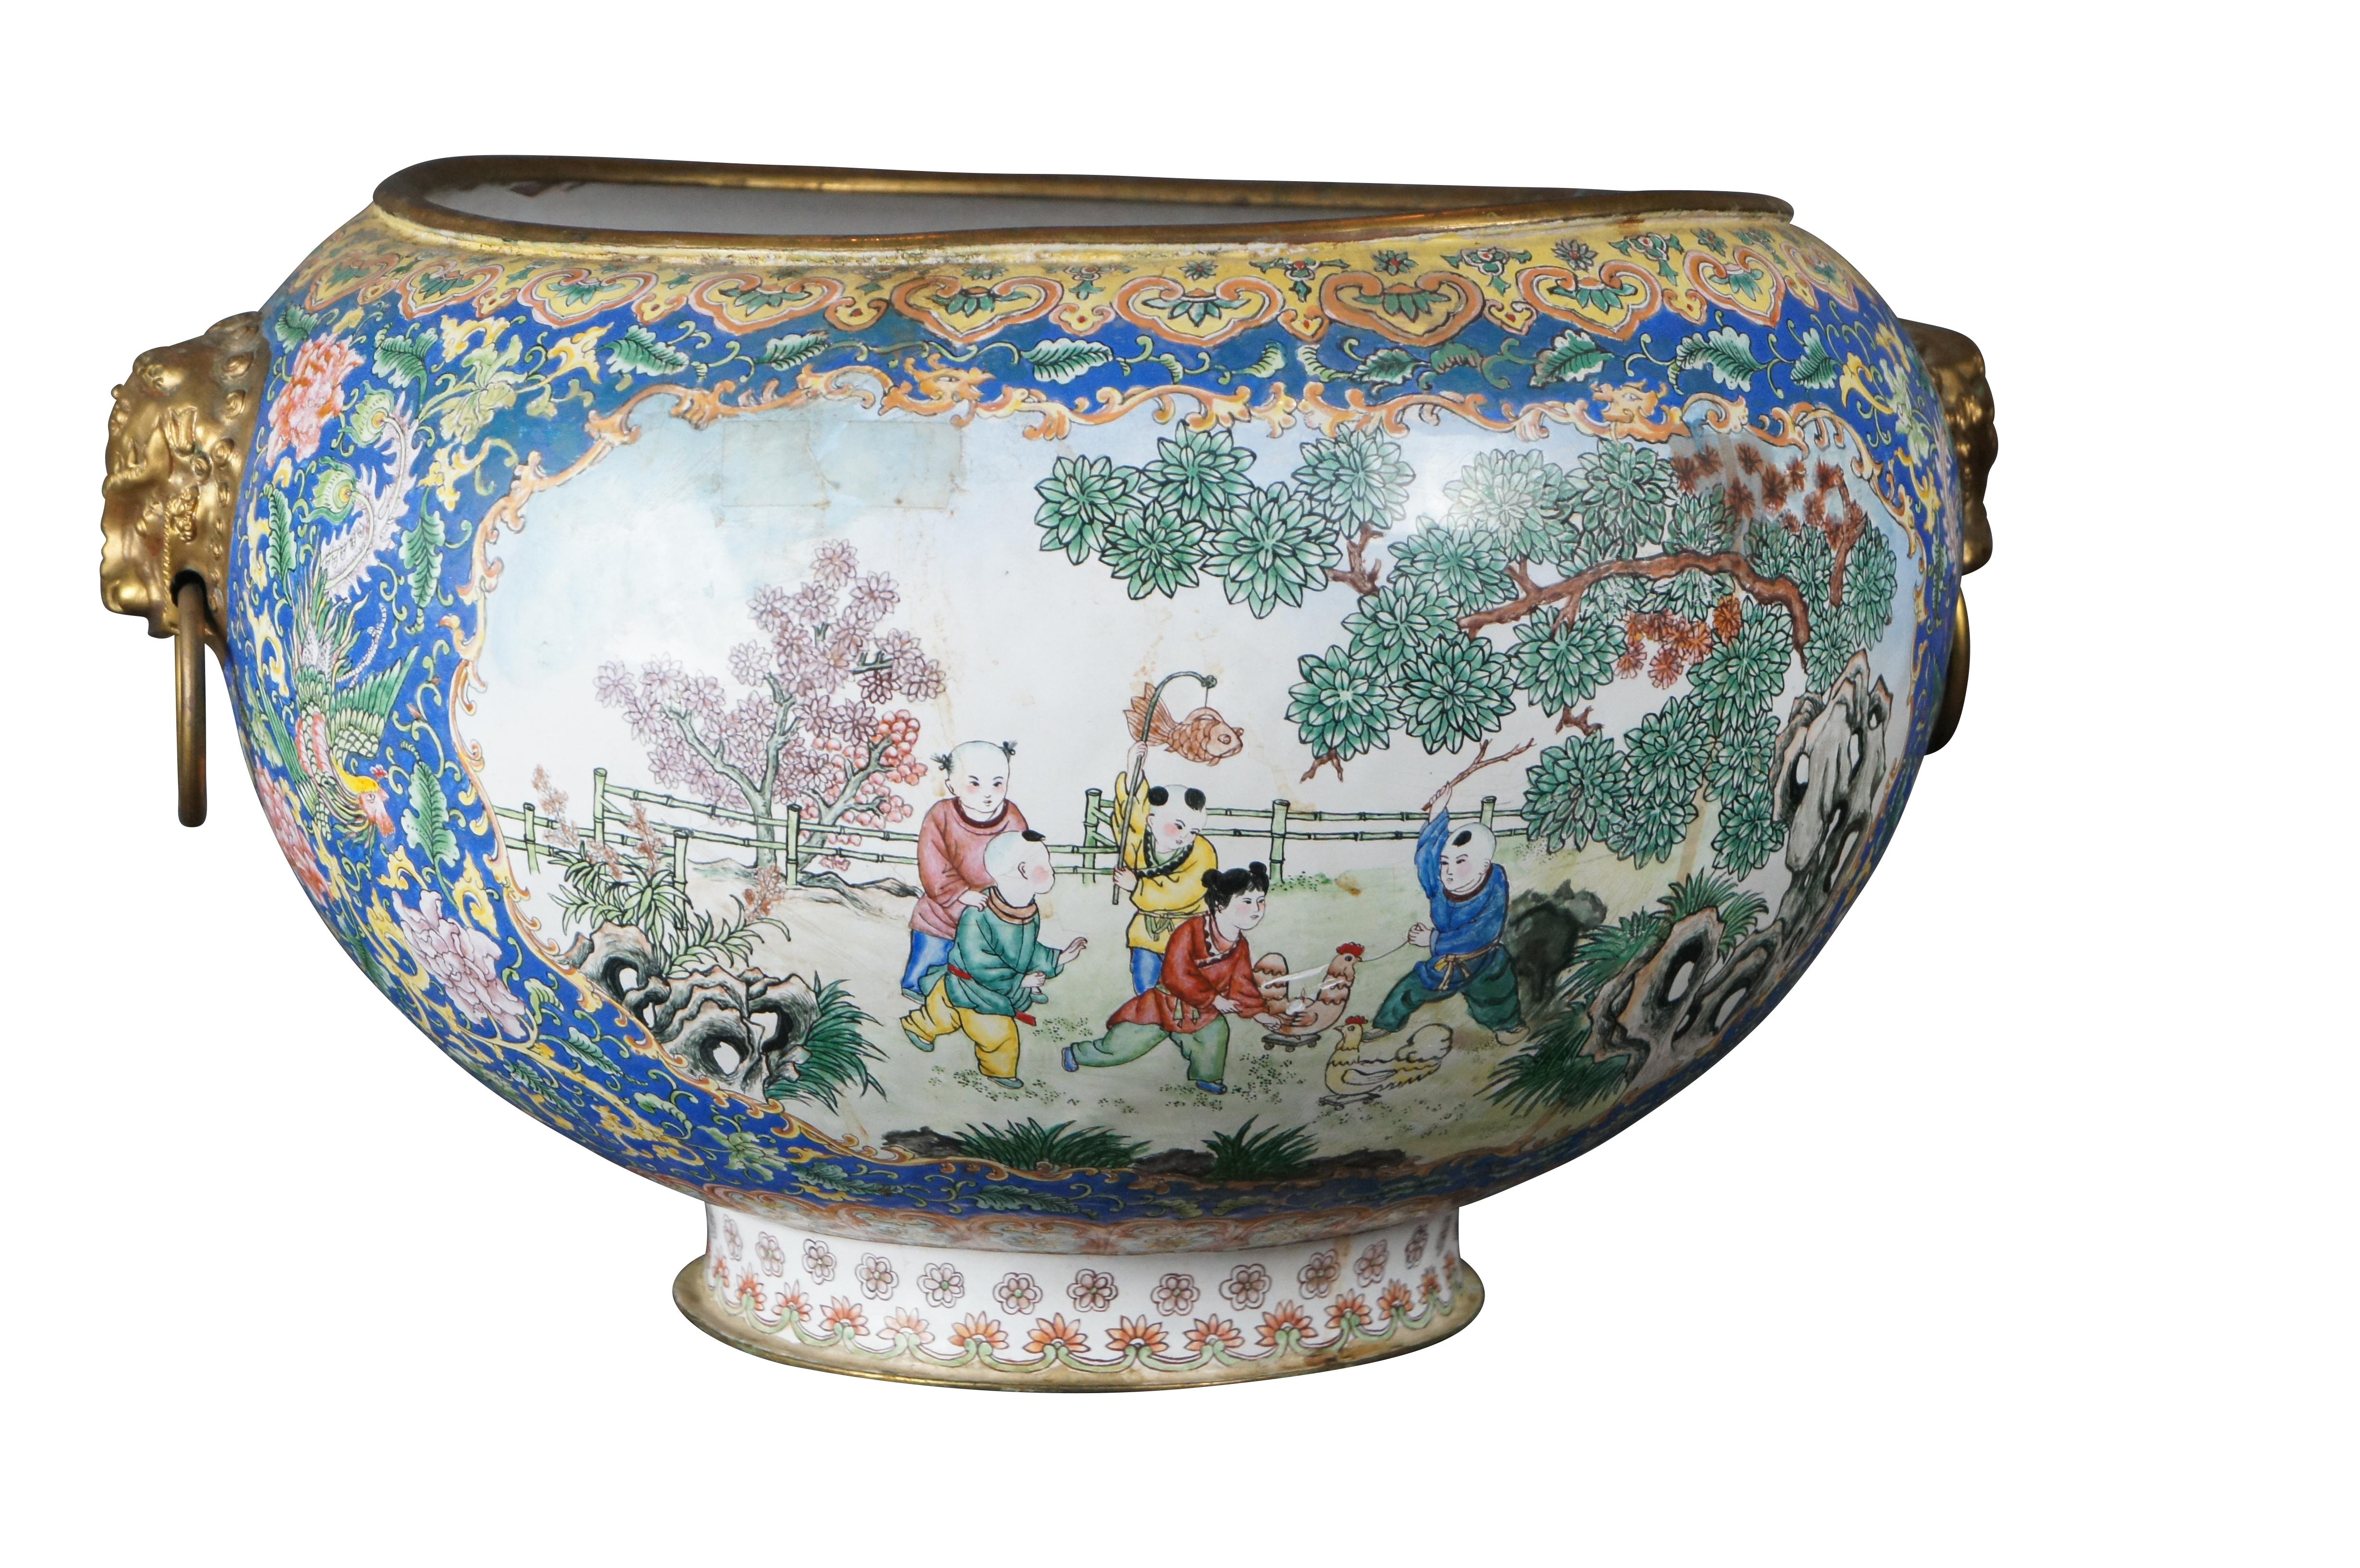 Chinoiserie Antique Chinese Canton Enamel on Copper Jaridiniere Fish Bowl Gilt Metal Handles For Sale